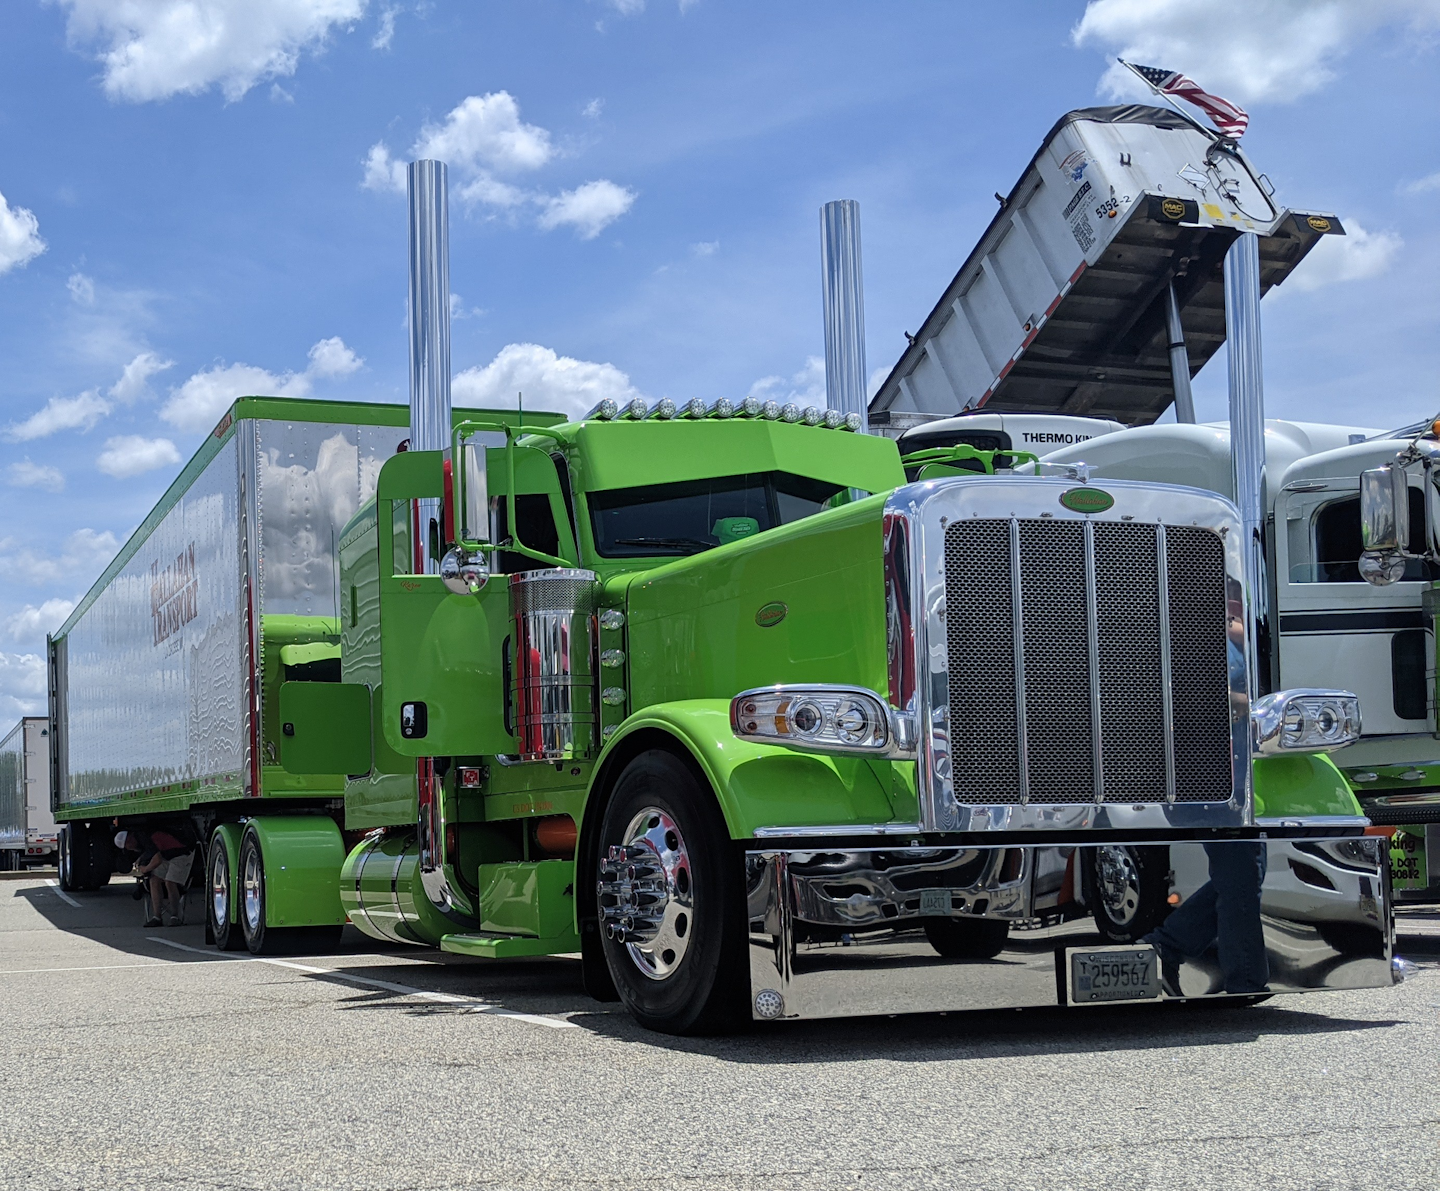 After leaving the road to work full time in the office, Hallahan set out to build a demo truck with this 2022 Peterbilt 389, which he named 